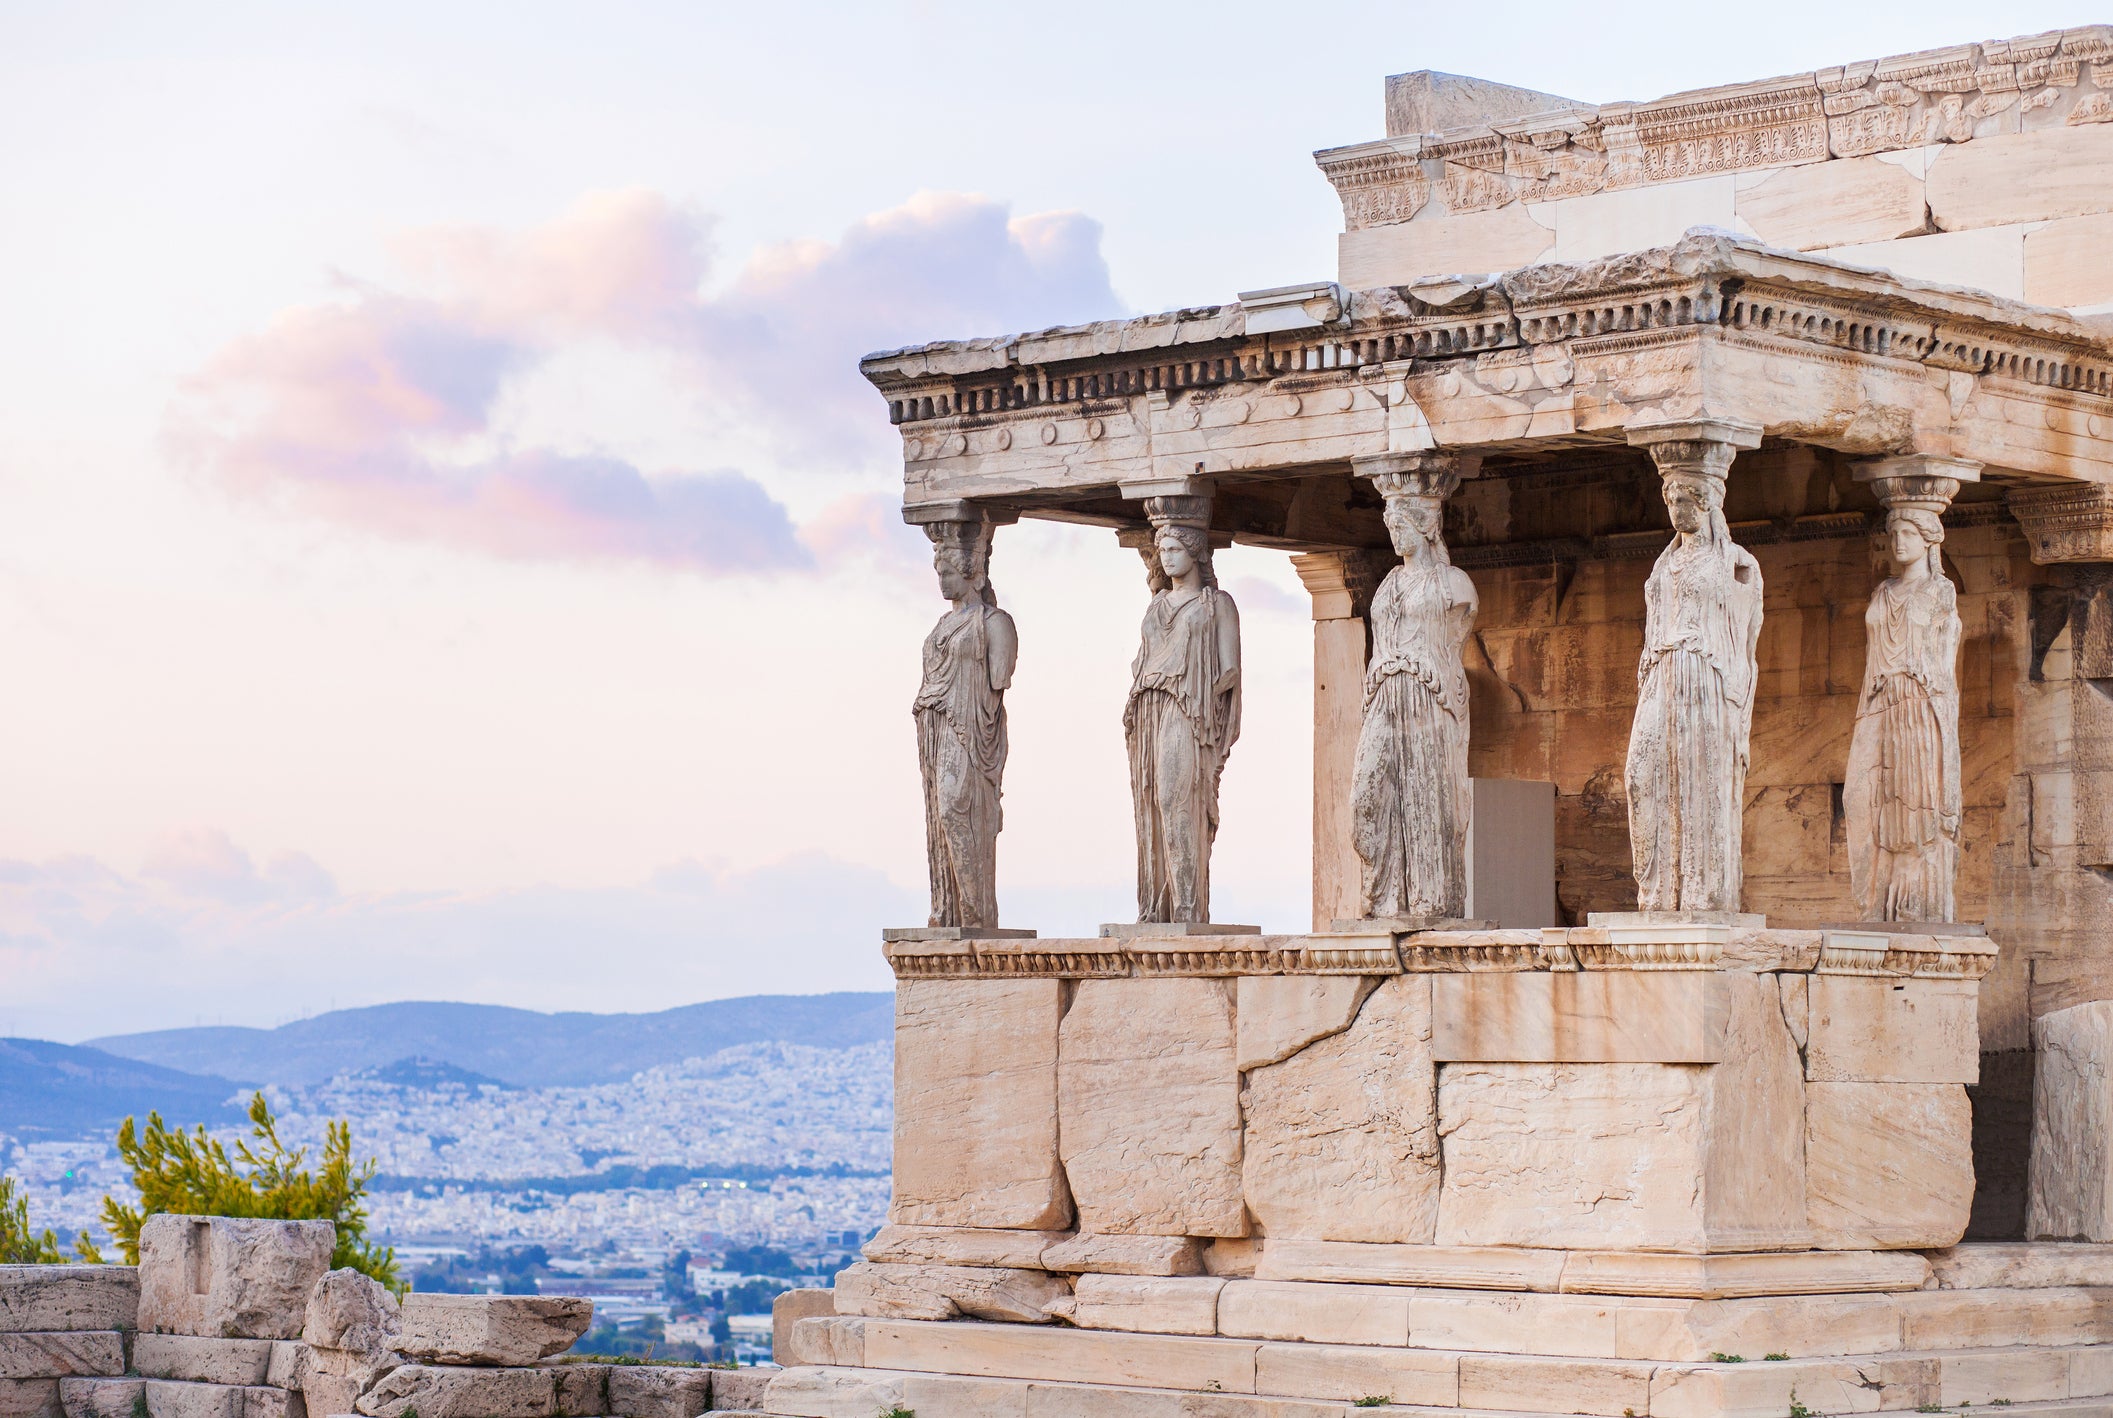 Six maidens make up the Porch of the Caryatids at the Acropolis, Athens